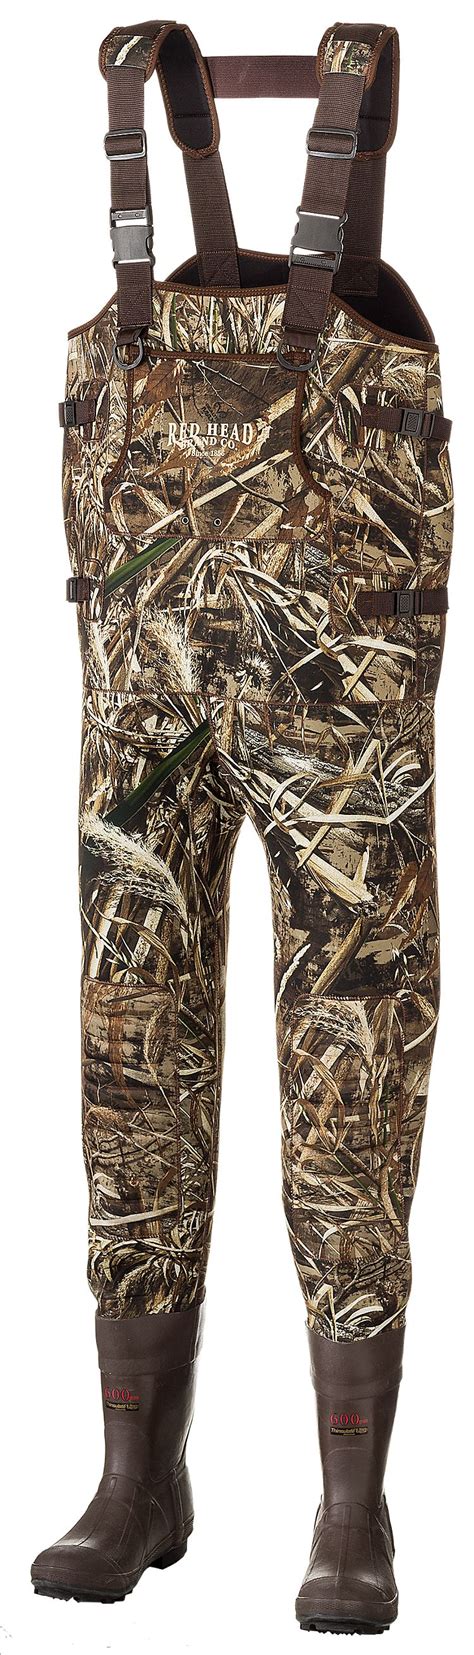 Redhead waders. Stores. Boats. Offroad. Buy the RedHead RCT Warrior Ultra Mil-Spec Tactical Boots for Men and more quality Fishing, Hunting and Outdoor gear at Bass Pro Shops. 